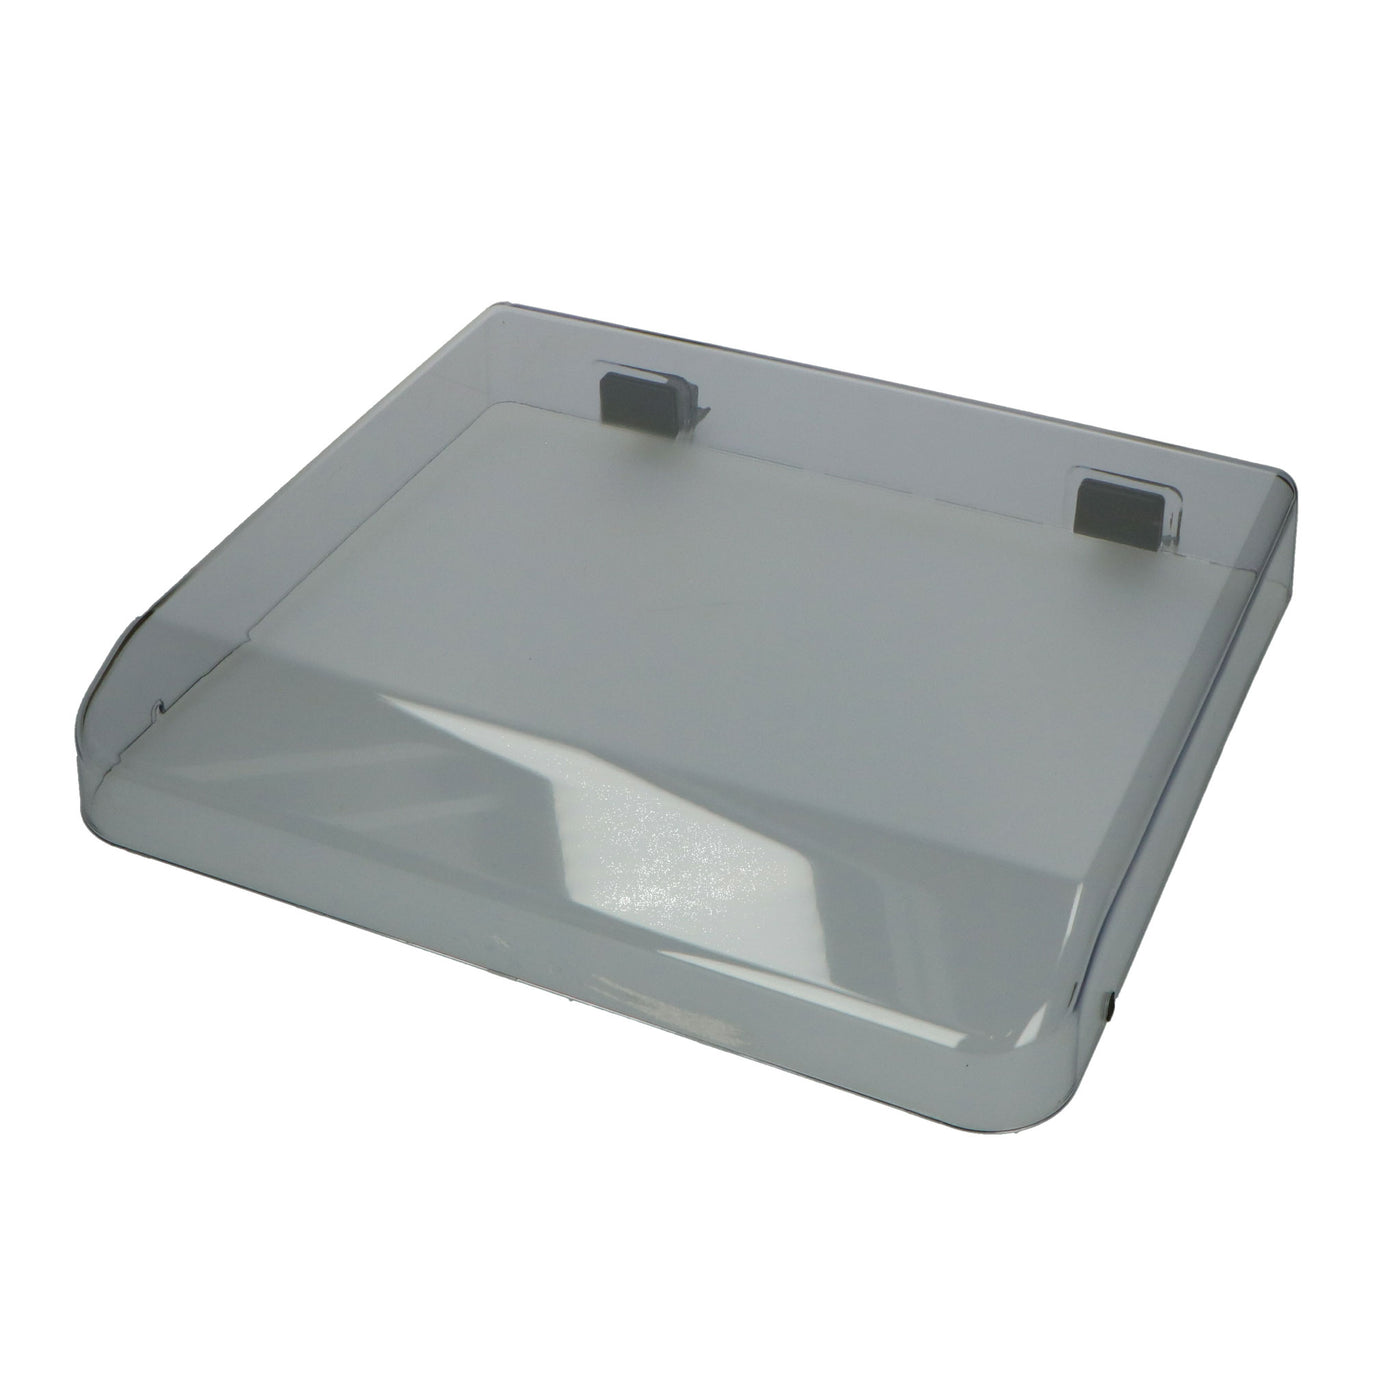 P003683 - Dust cover with hinge V1 MC-460